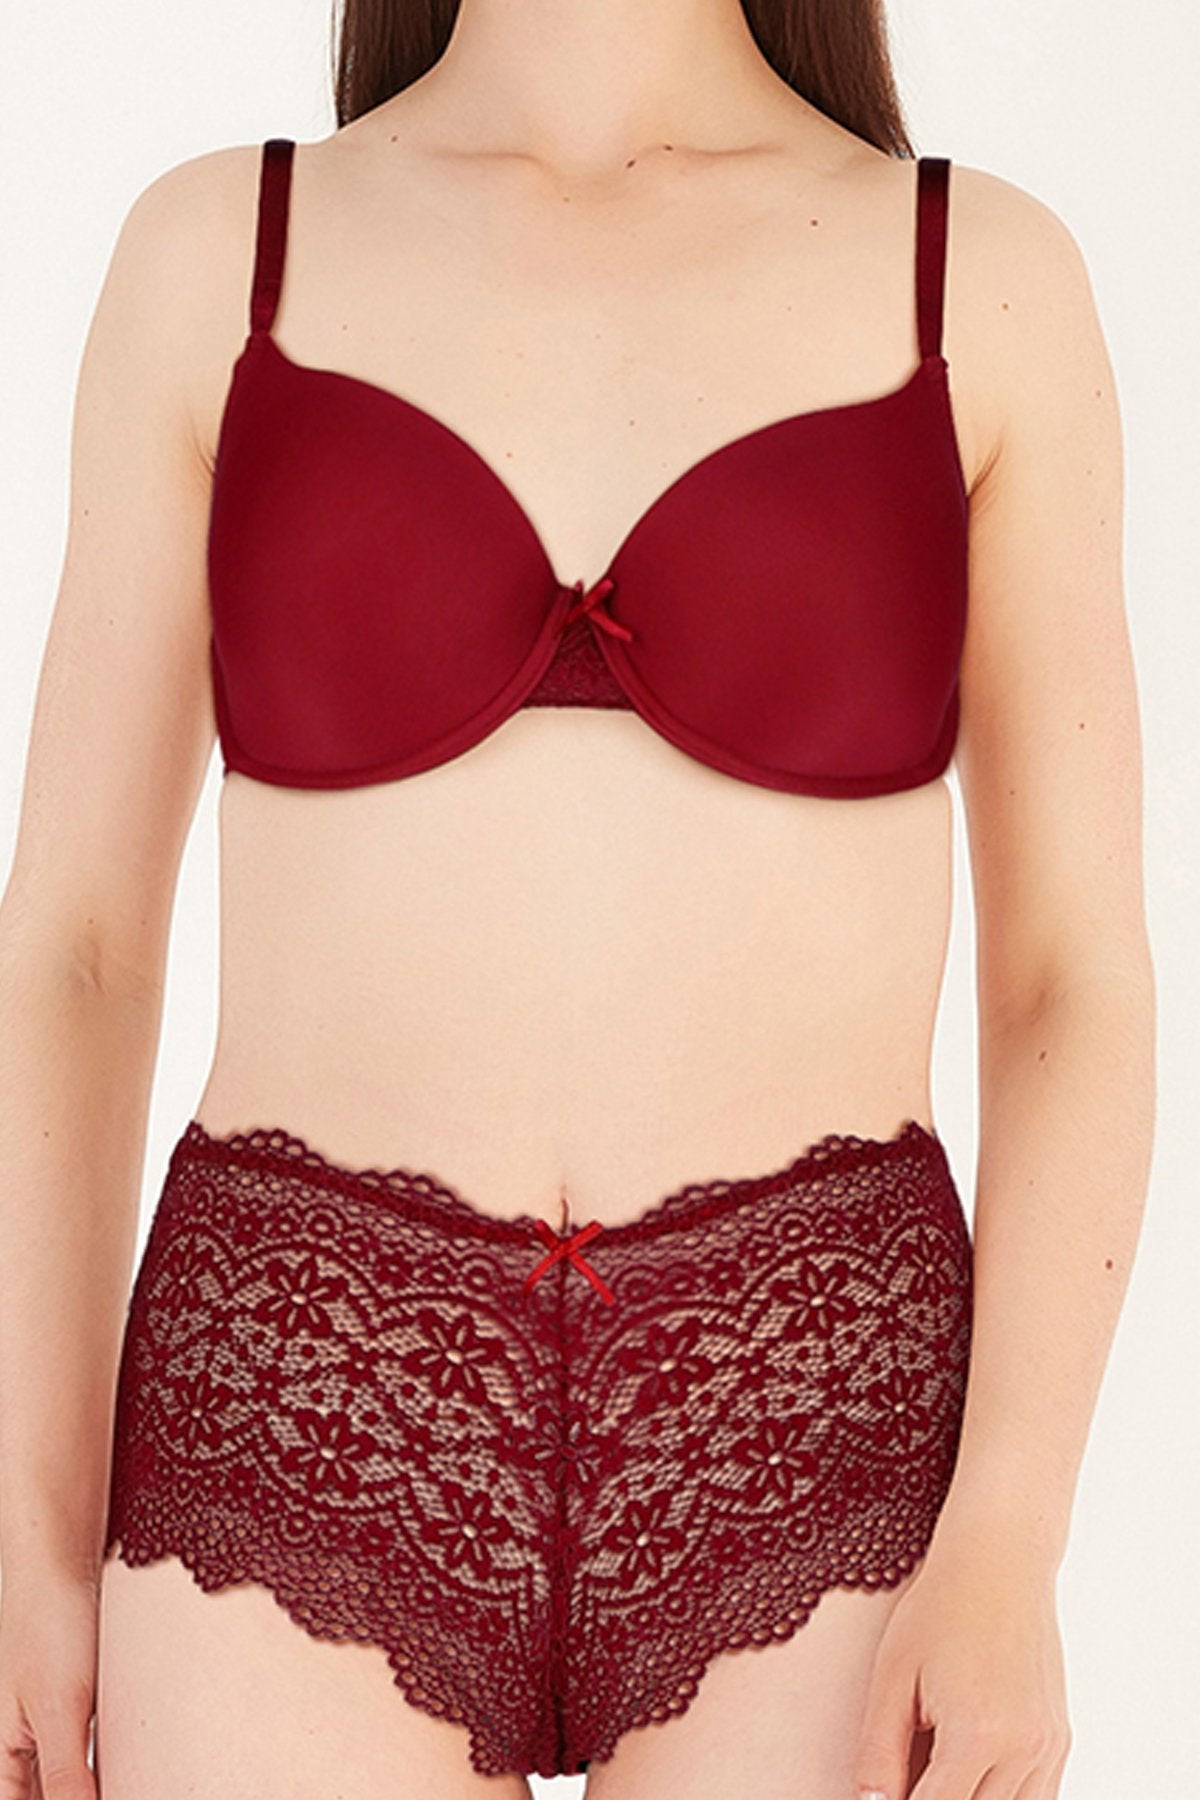 BLS - Fiona Wired And Padded Bra Set - Burgundy